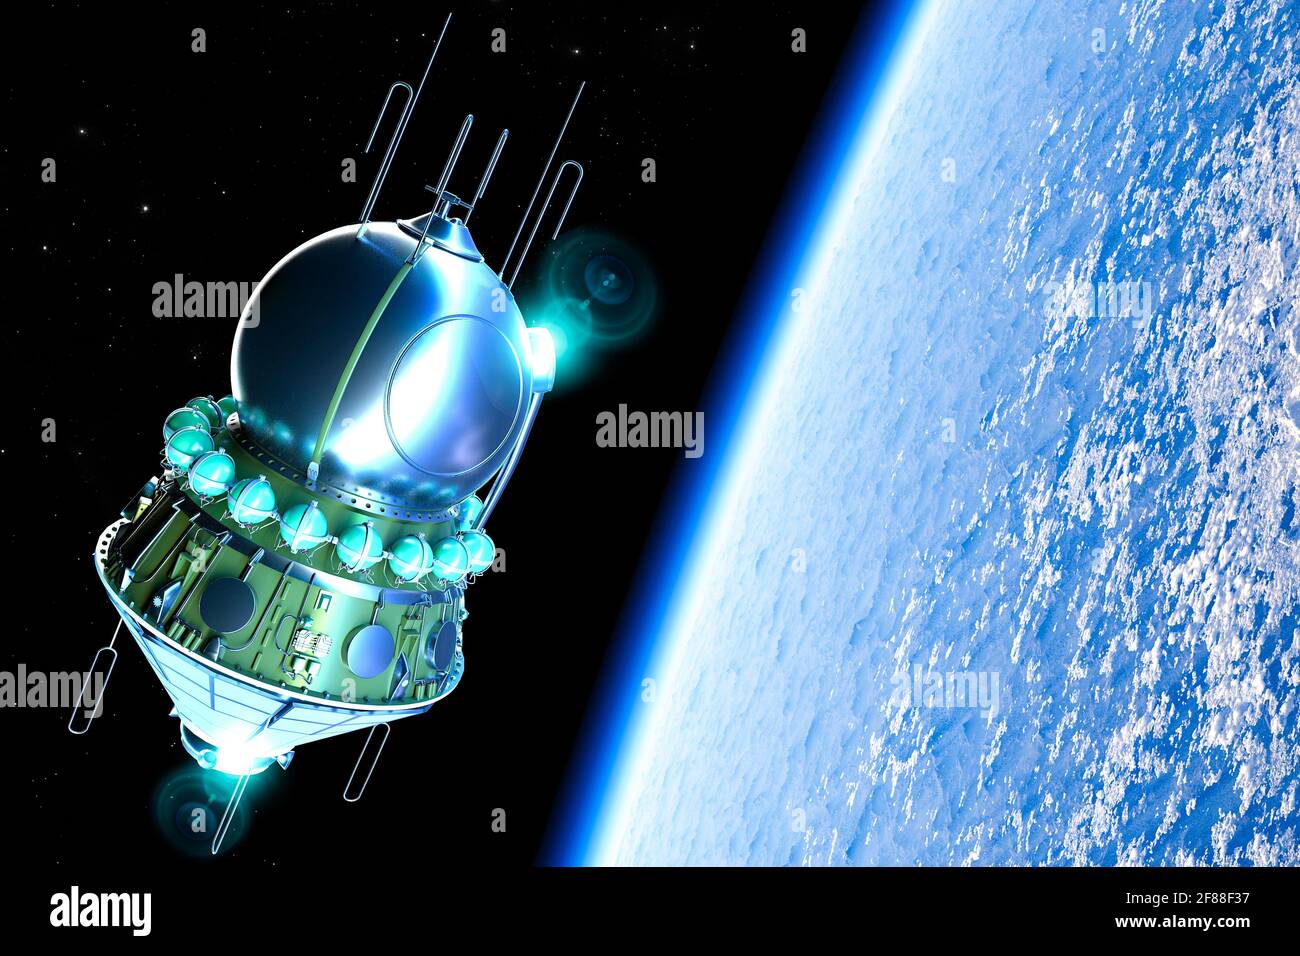 The Vostok spacecraft, was a type of spacecraft built by the Soviet Union. The first human spaceflight by Soviet cosmonaut Yuri Gagarin Stock Photo